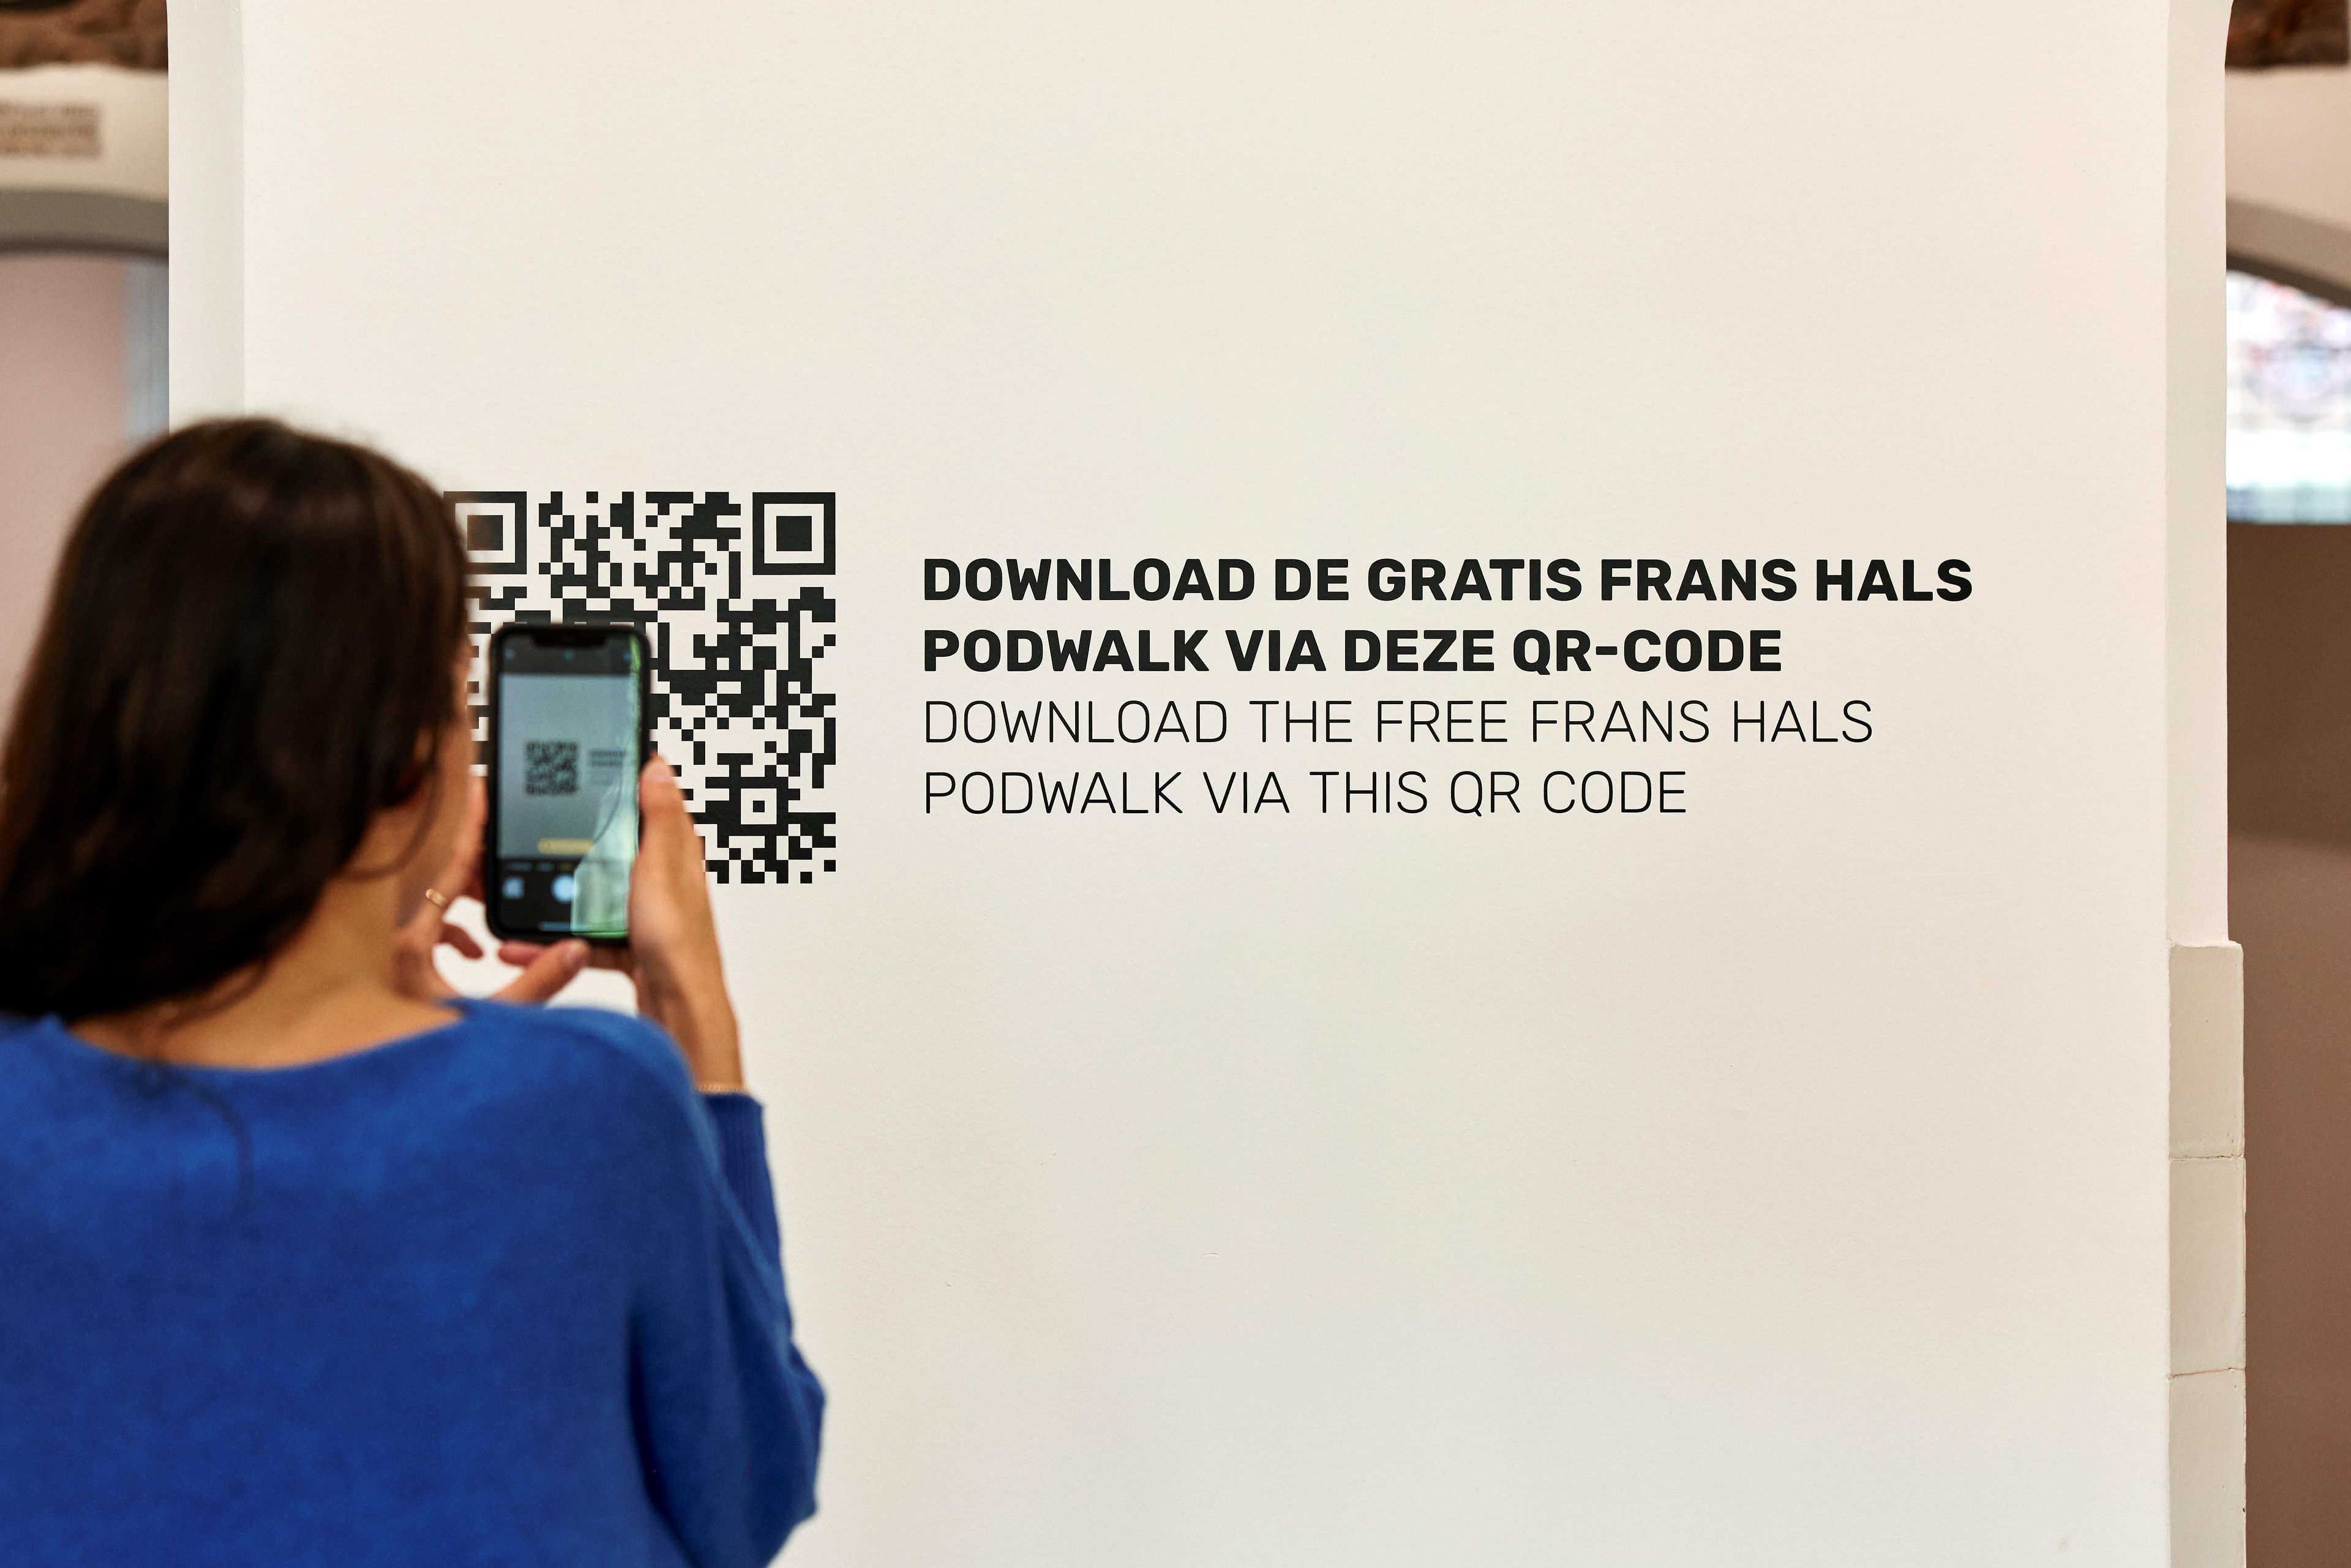 Visitor scanning the podwalk QR code on the wall of the Frans Hals Museum hall.